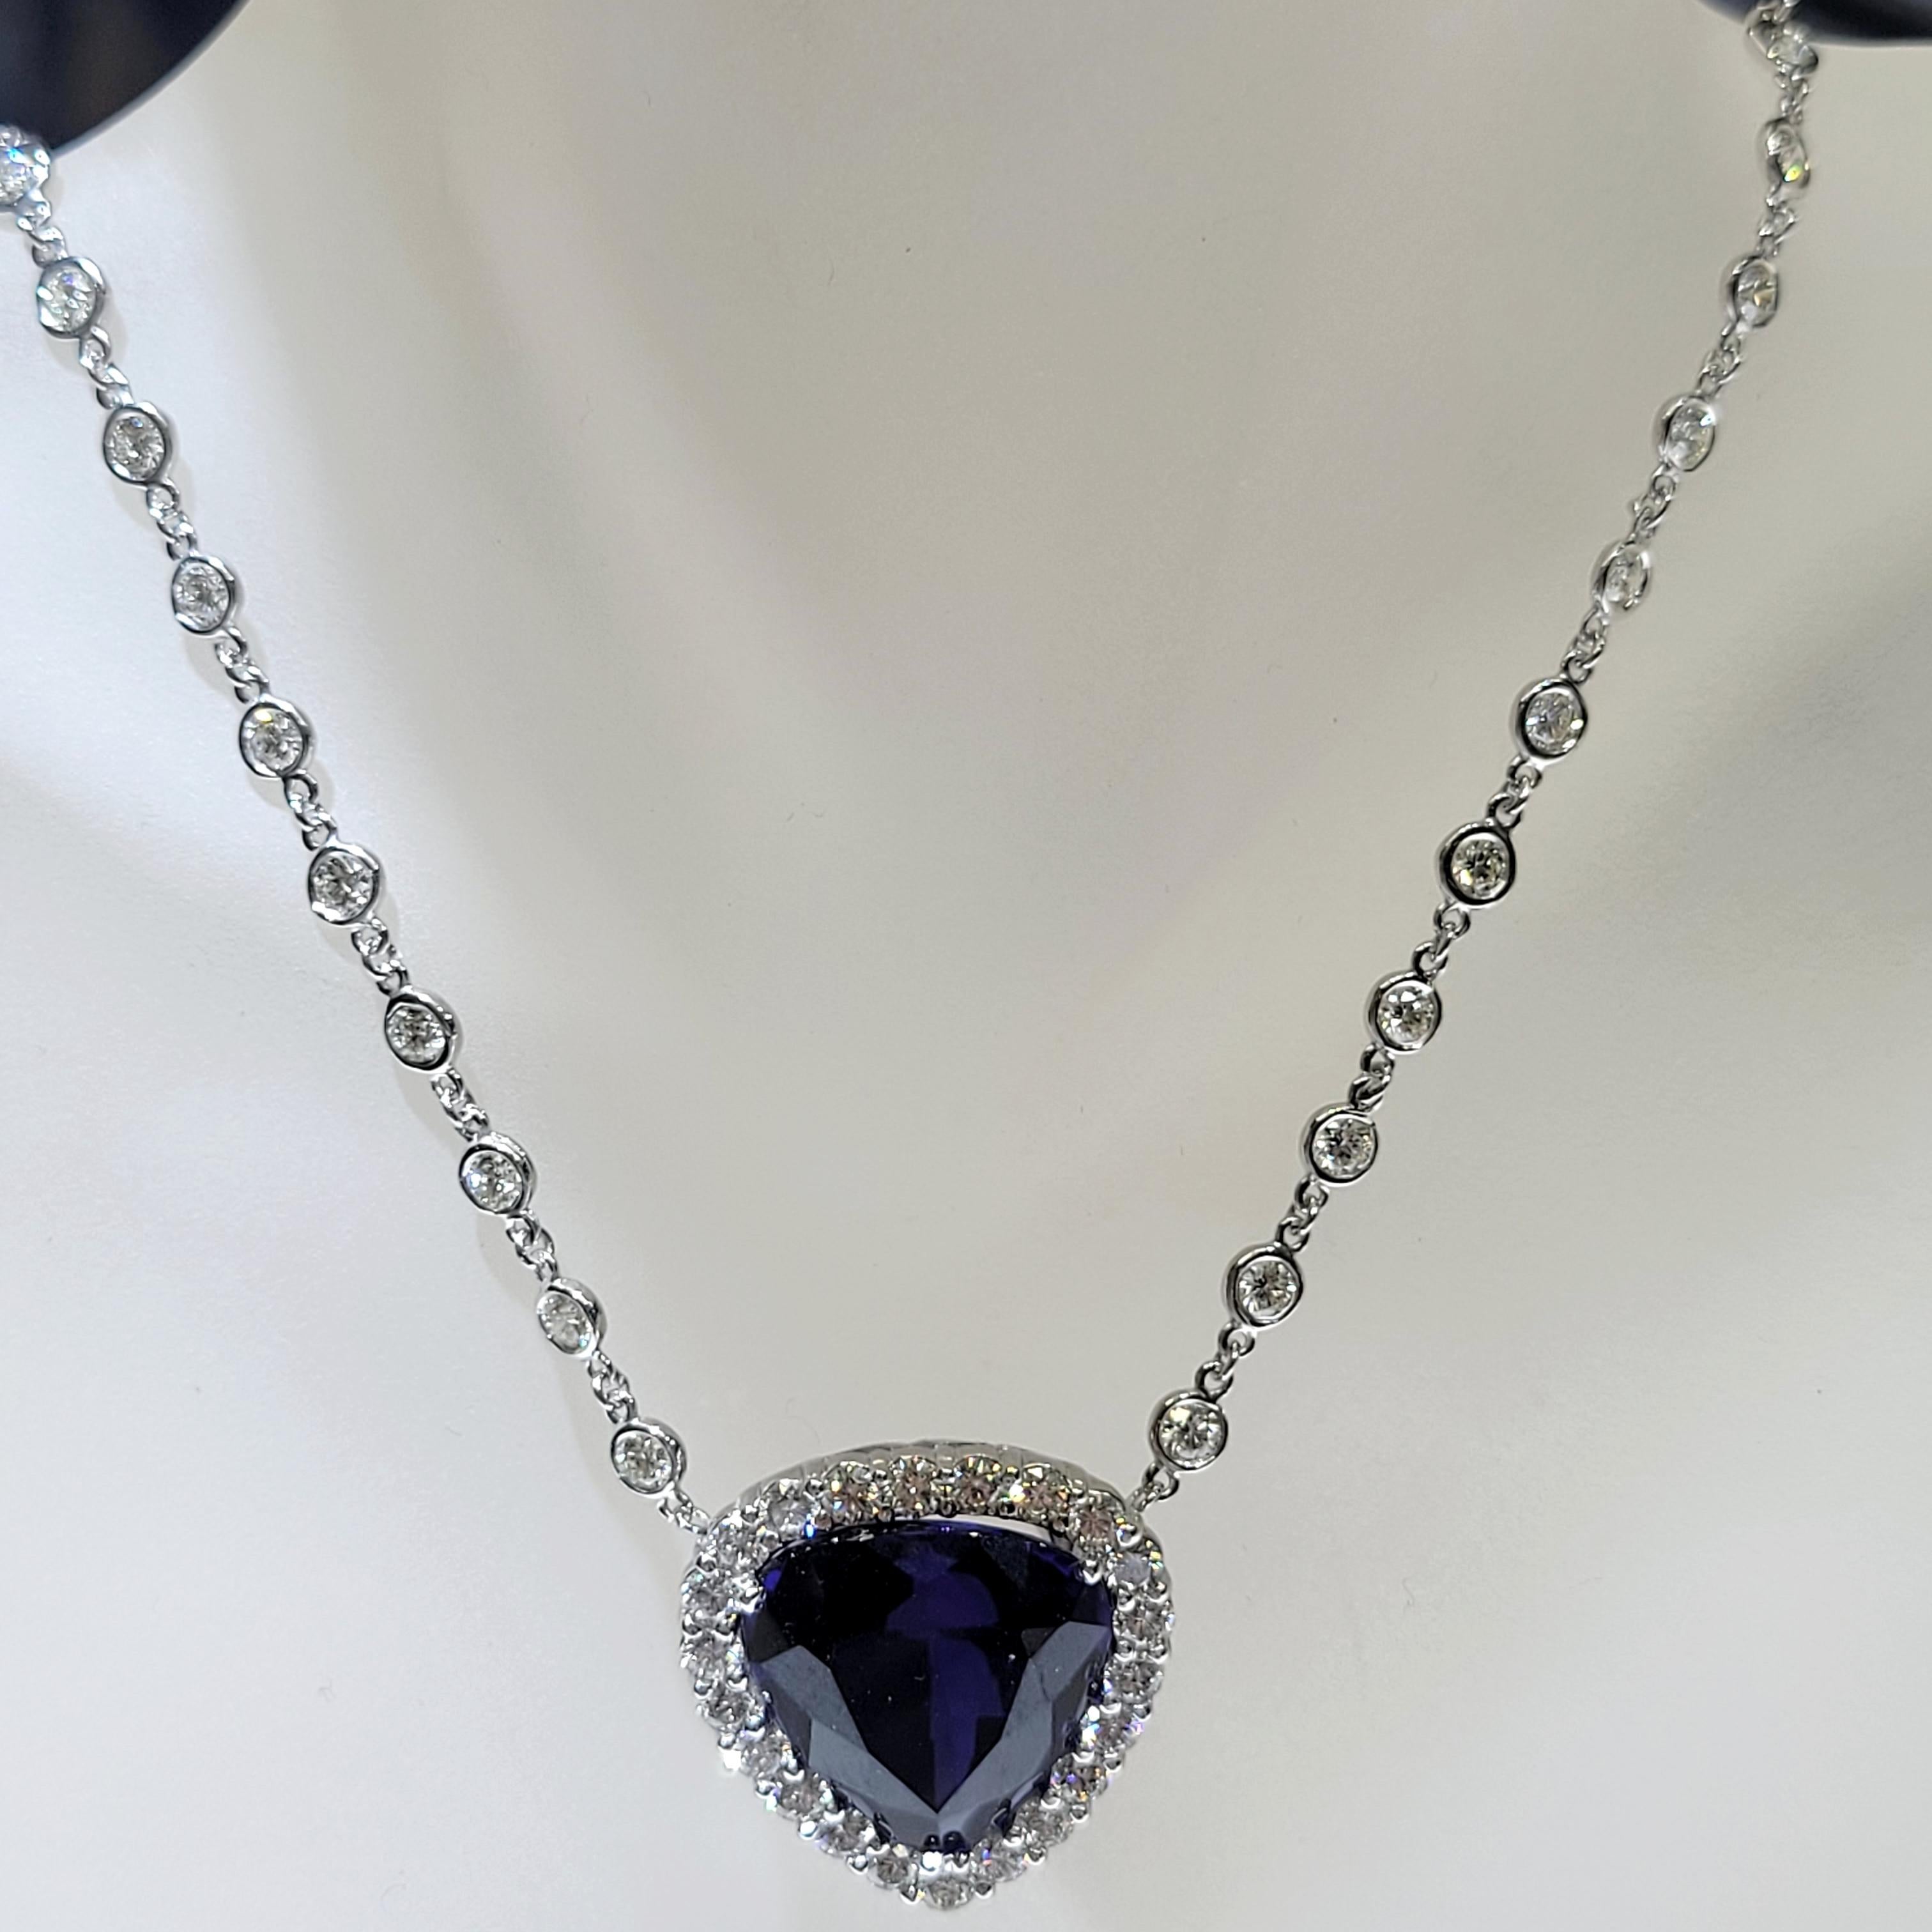 Neoclassical 22.73 Ct Heart Shape Tanzanite-Diamond by the Yard Necklace w. 5.98 Ct Diamonds For Sale